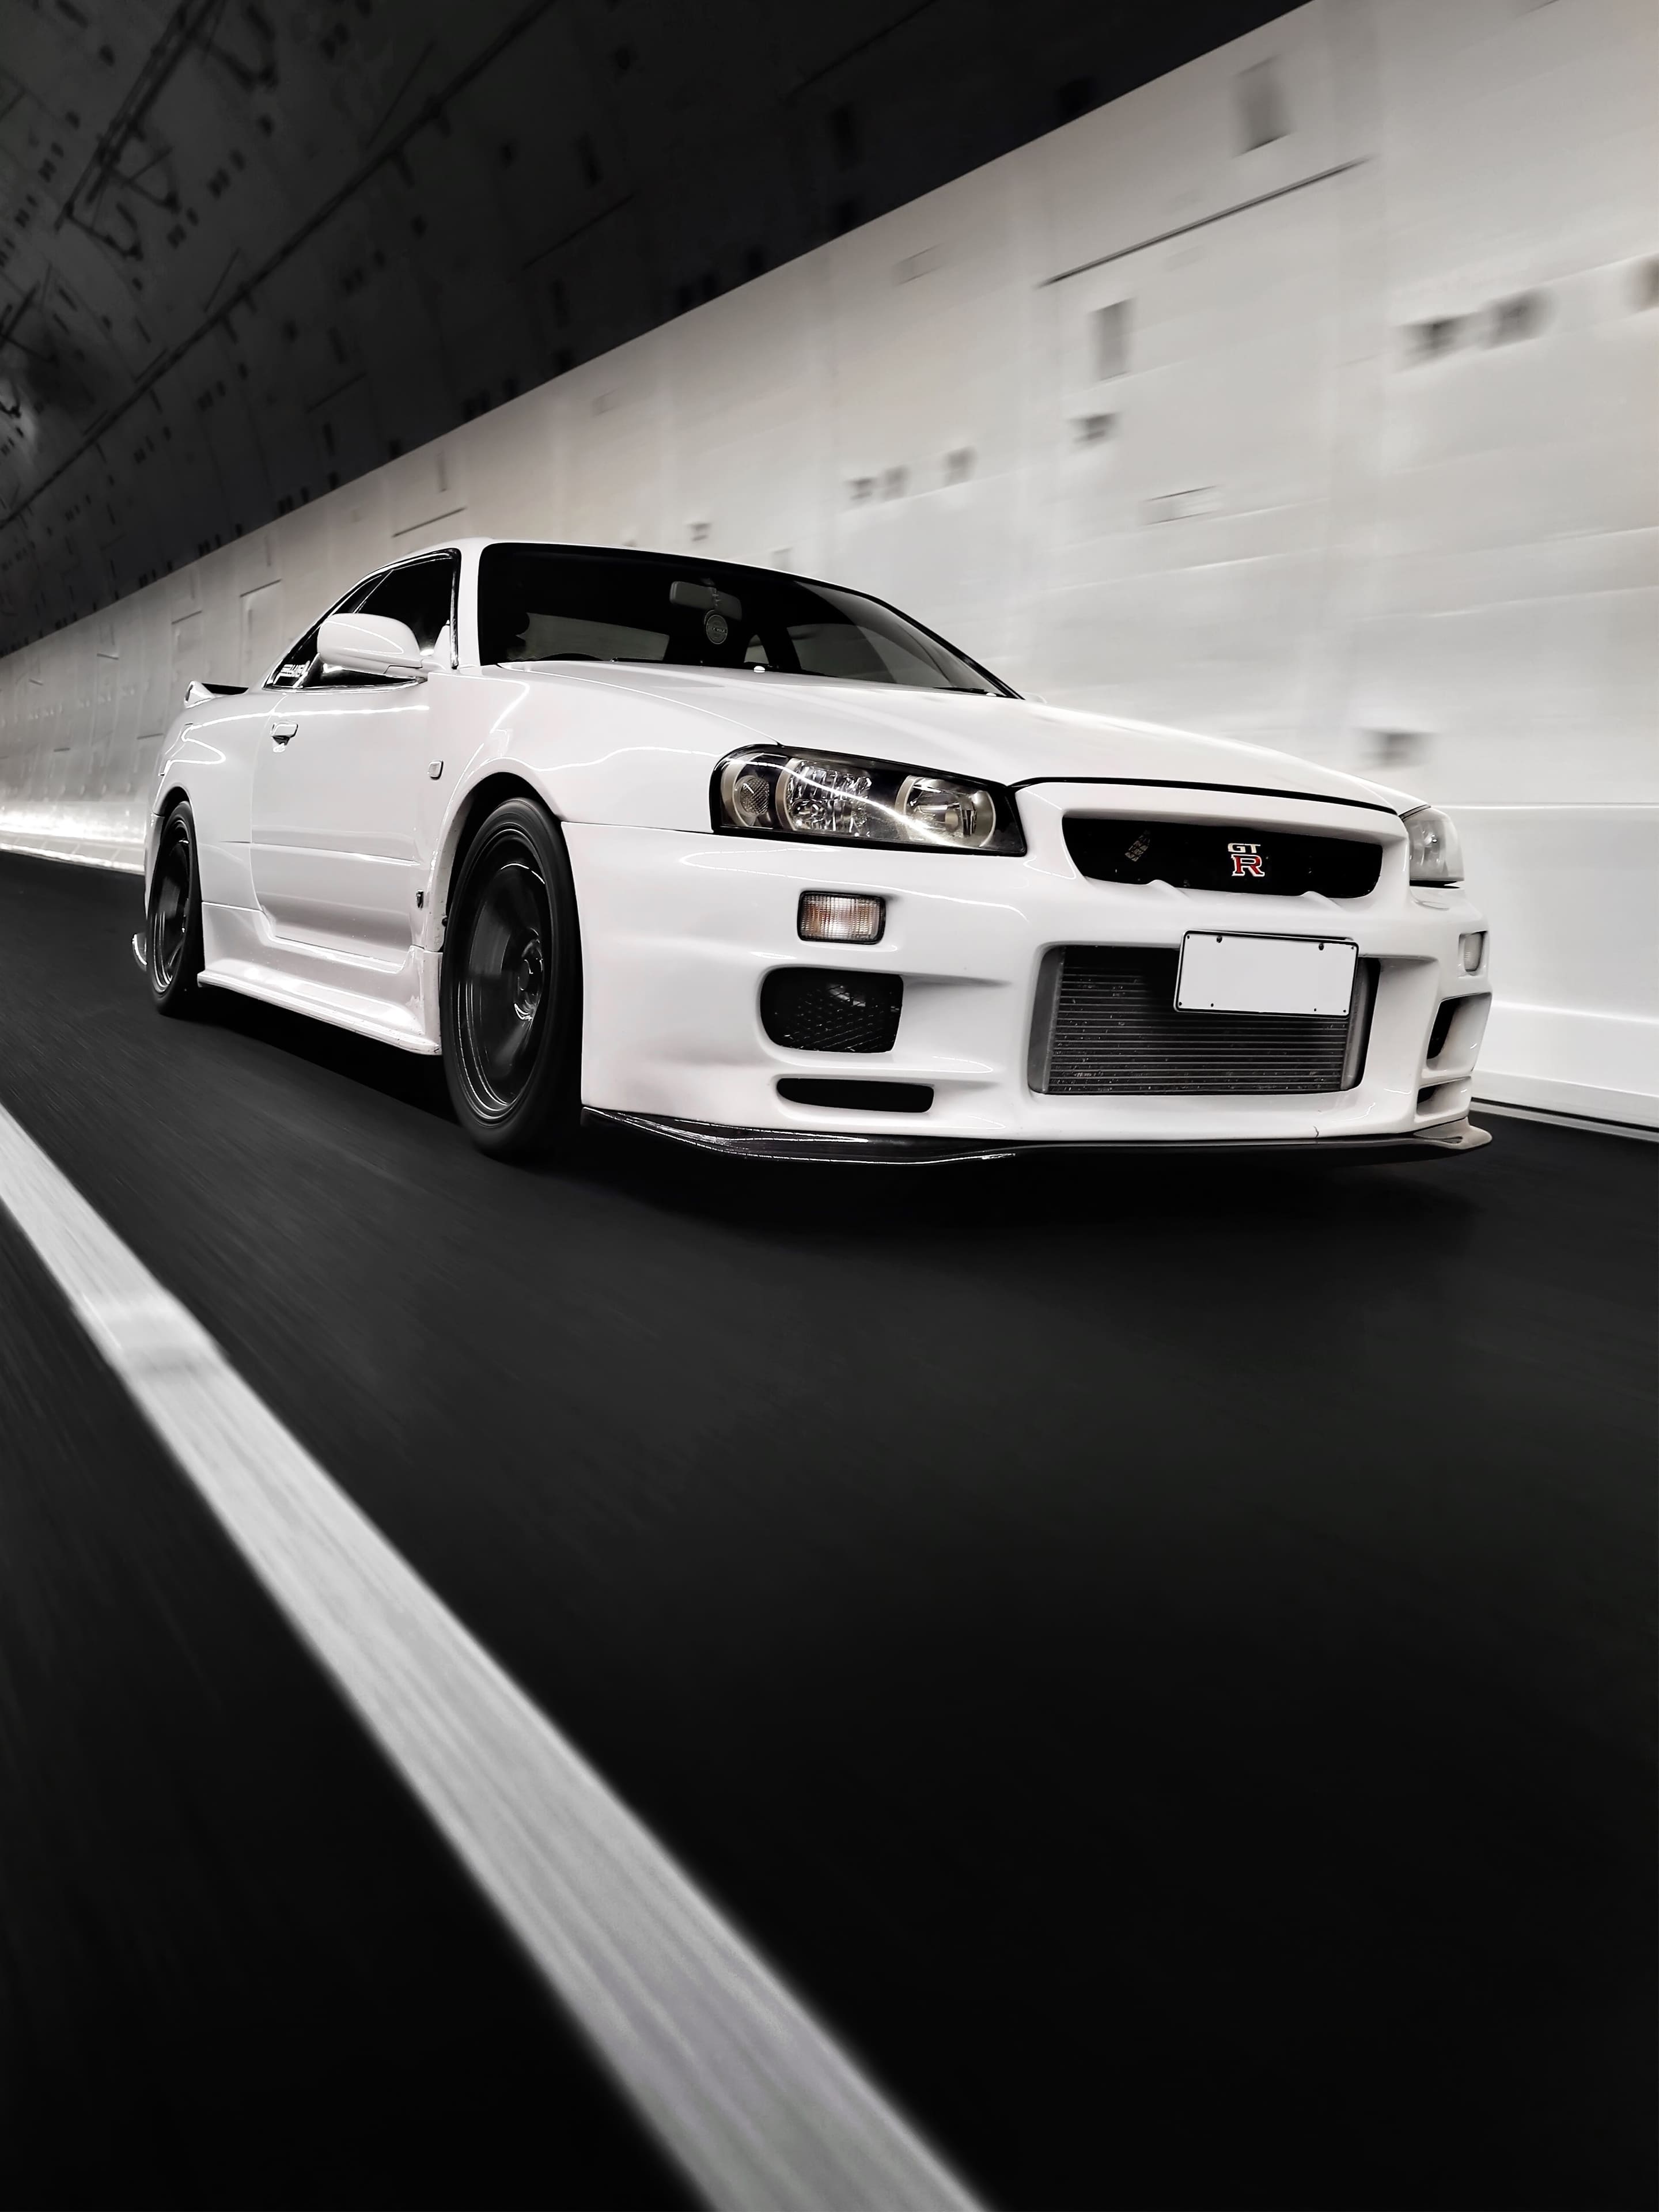 R34 Phone Wallpapers Top Free R34 Phone Backgrounds Wallpaperaccess